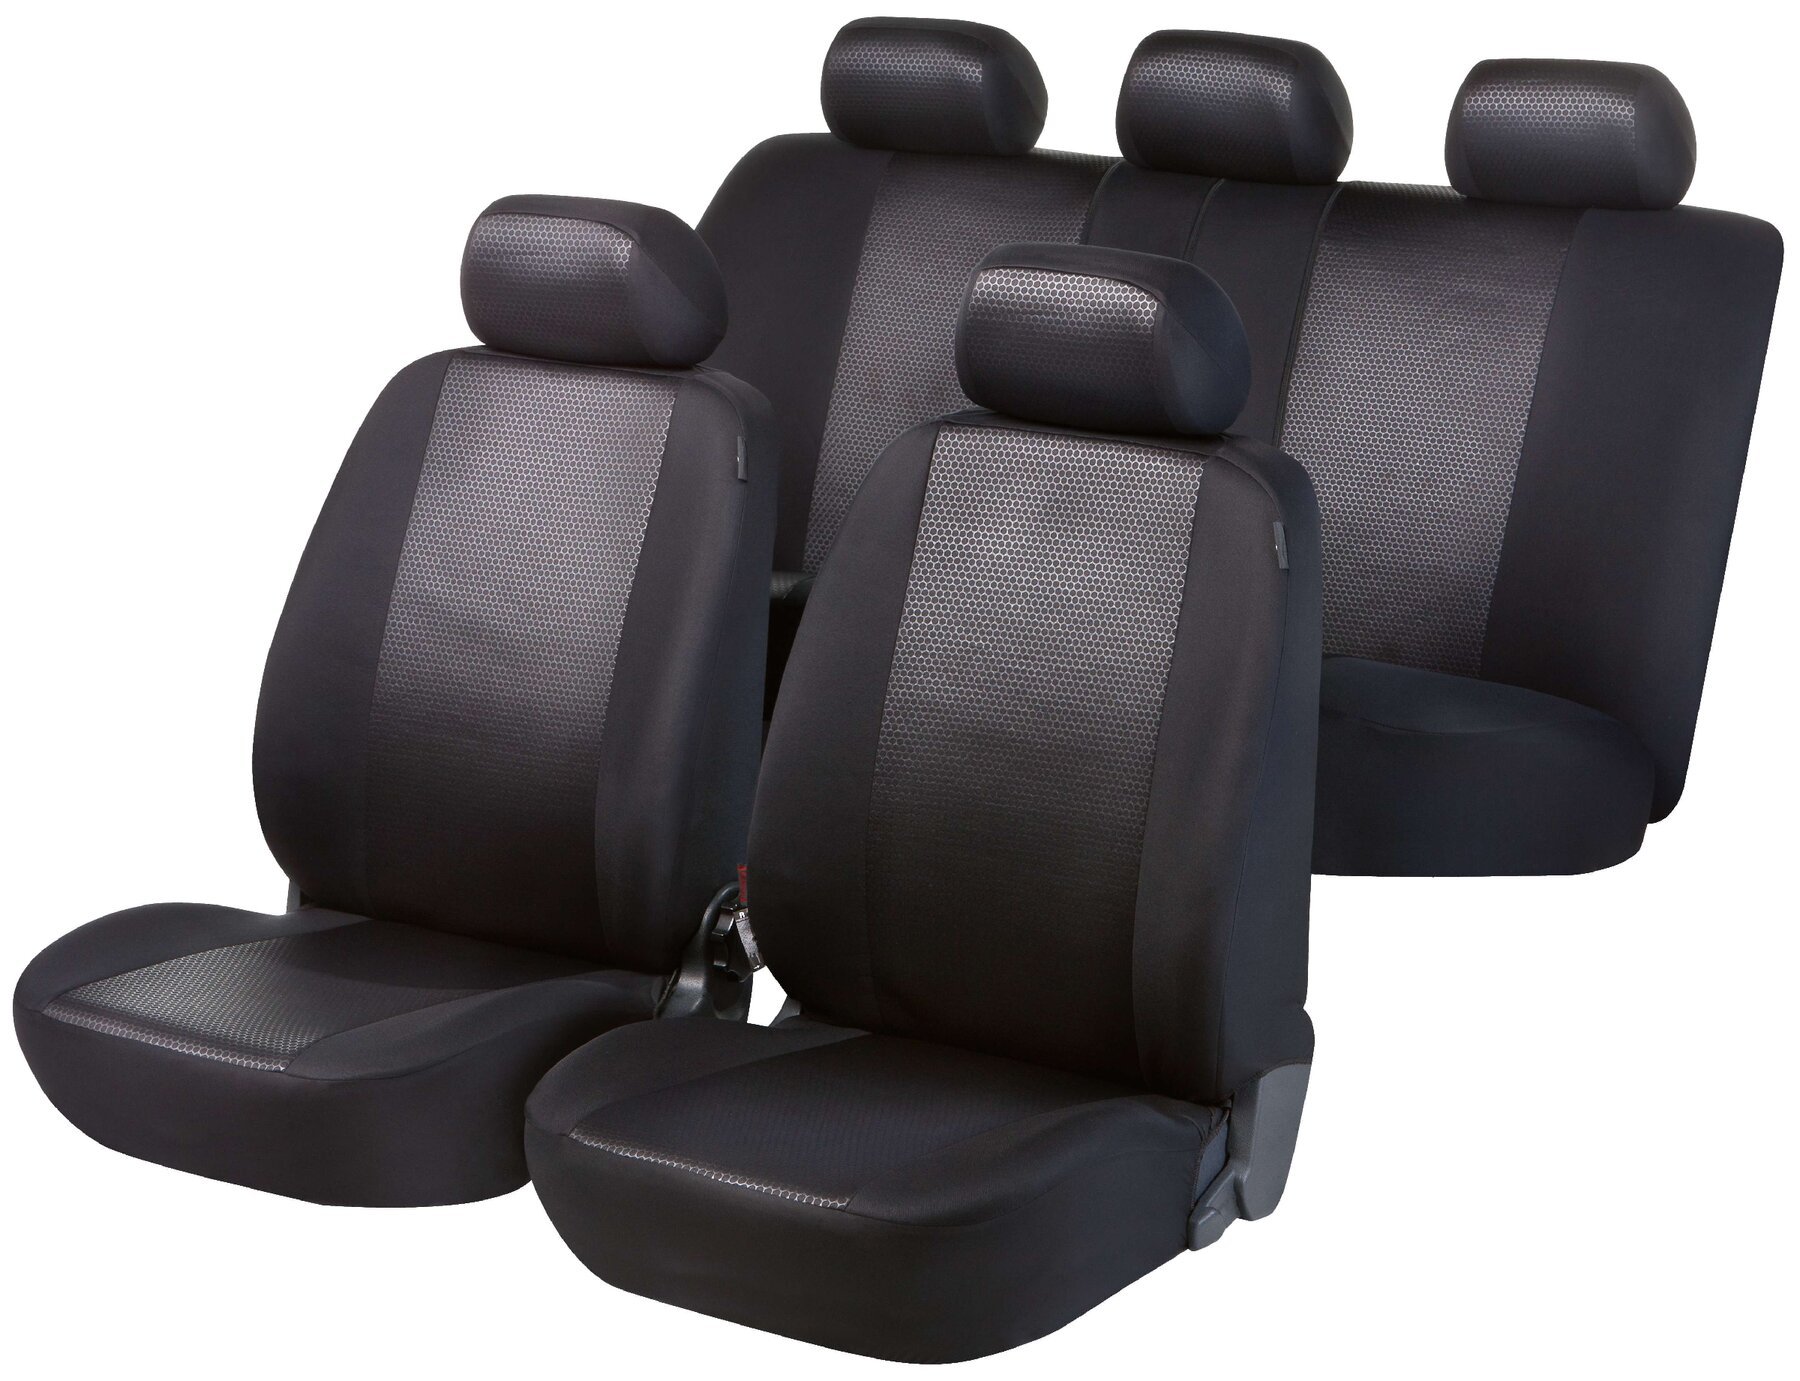 Car Seat cover Shiny black complete set for front seats and back seat